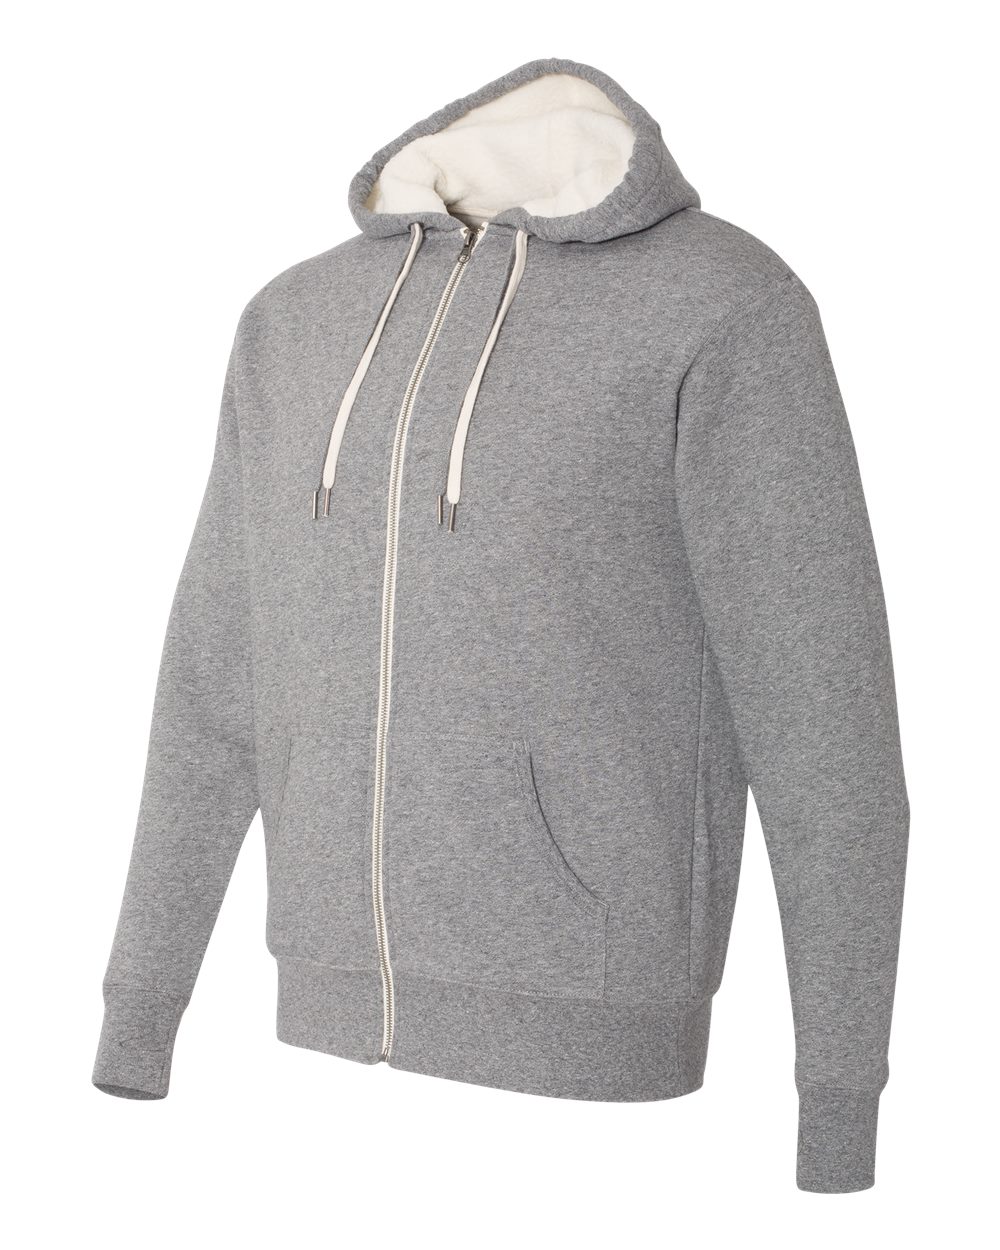 Independent Trading Co. EXP90SHZ - Unisex Sherpa-Lined Hooded Sweatshirt